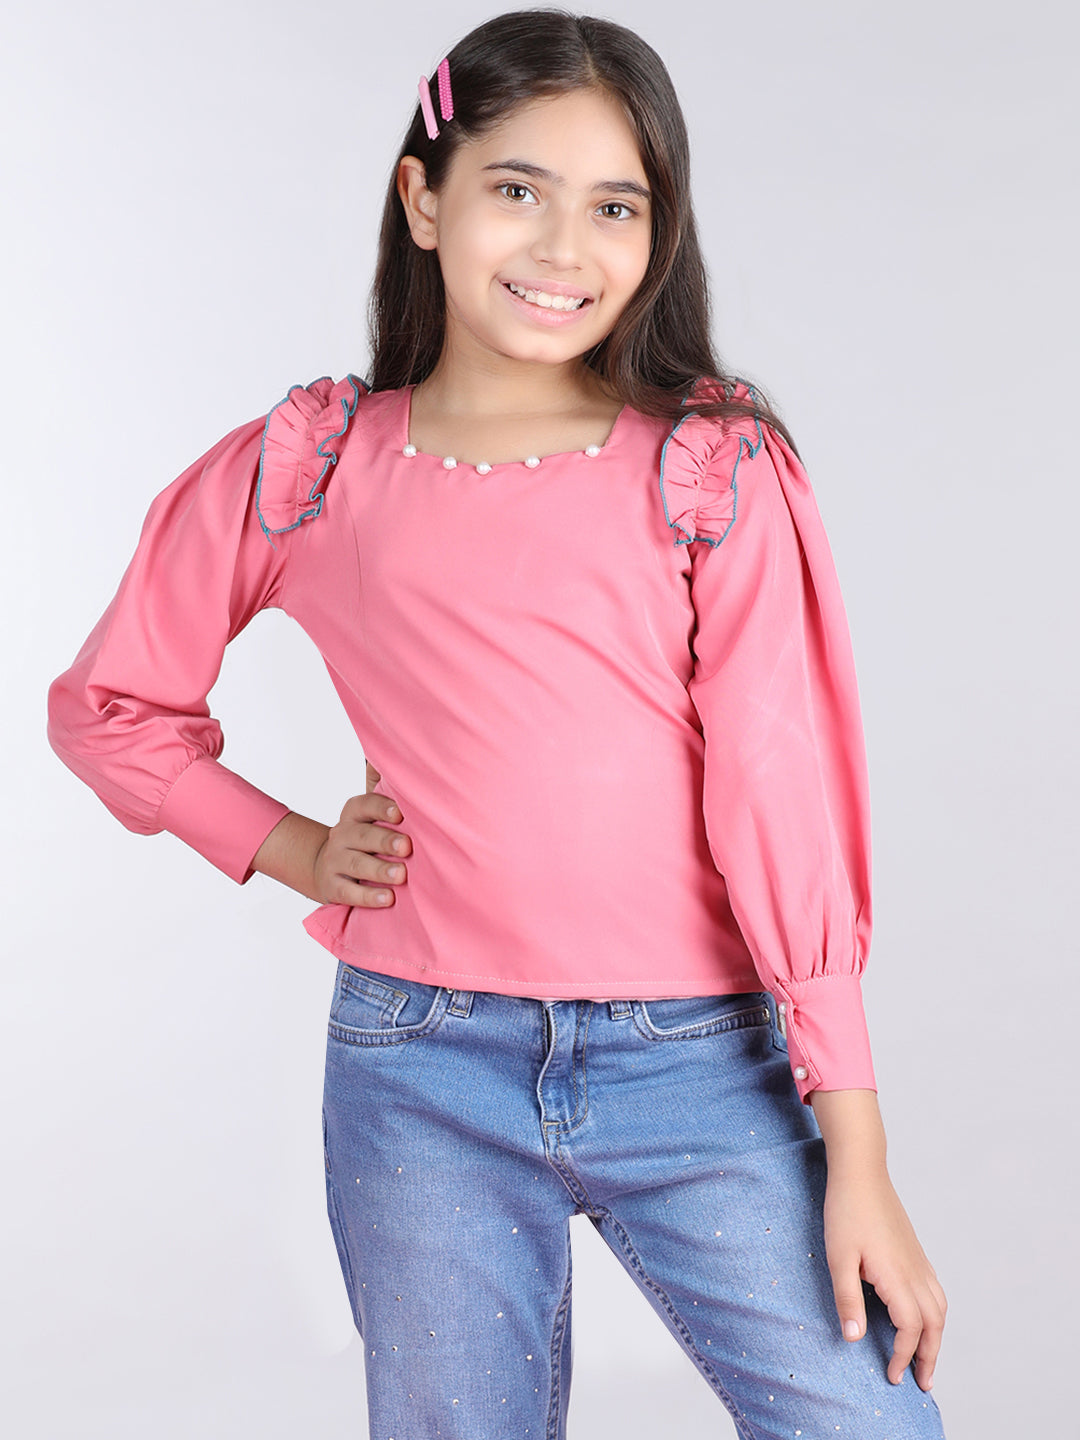 Cutiekins Solid Full Sleeves Polyester Tops-Peach & White